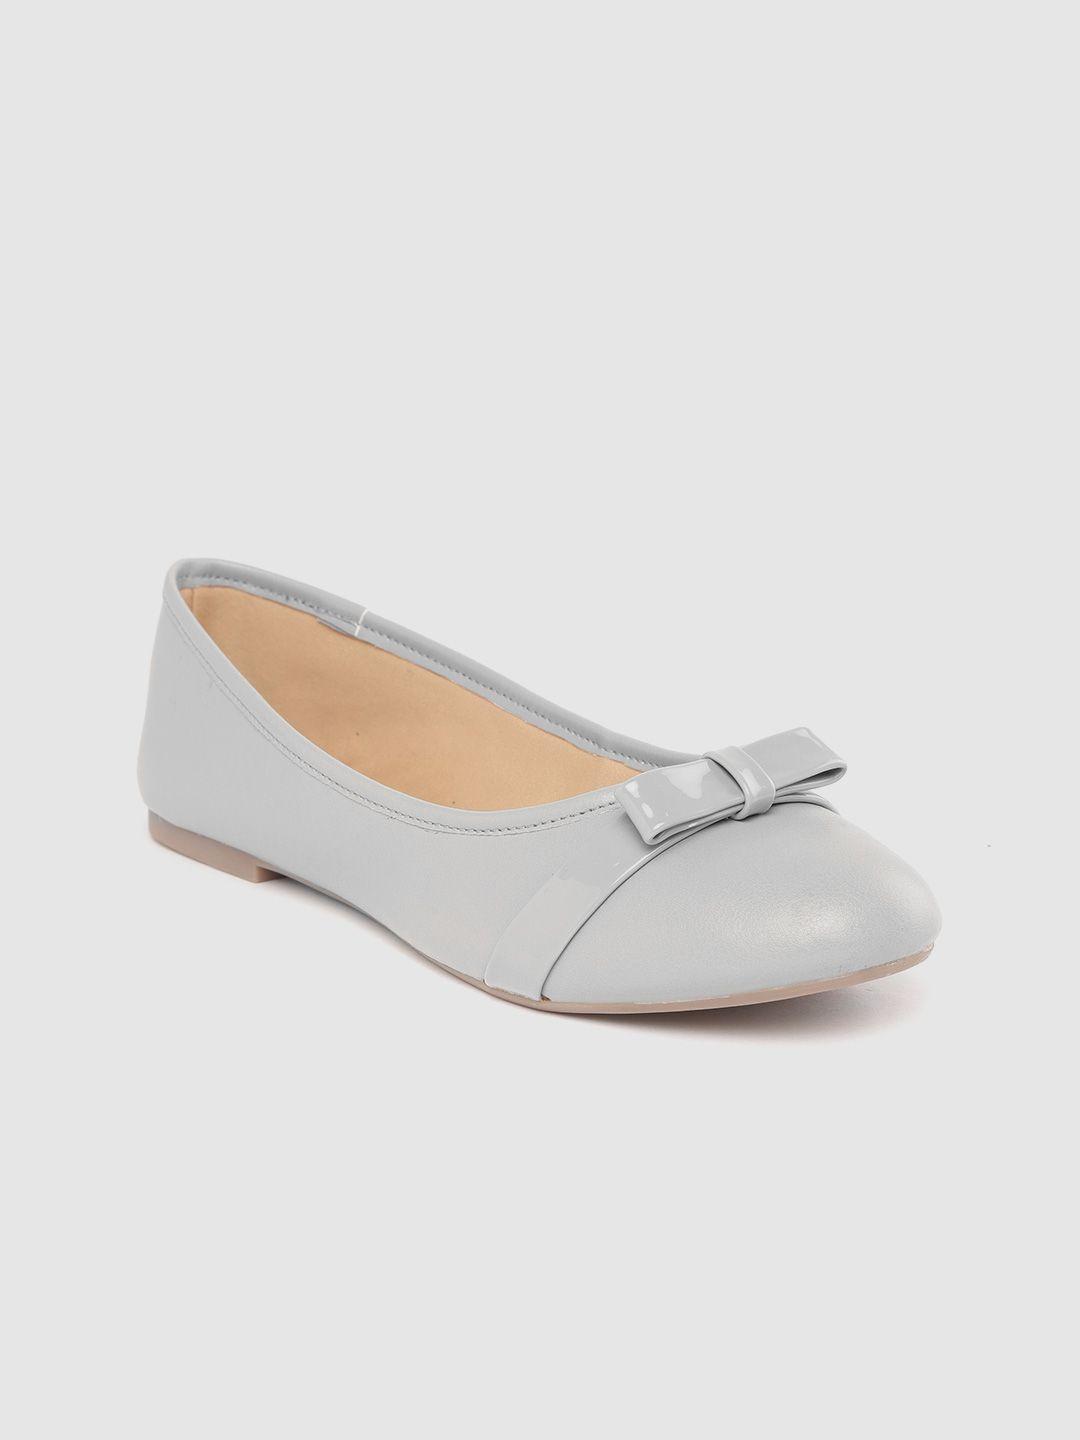 carlton-london-women-grey-solid-ballerinas-with-bow-detail